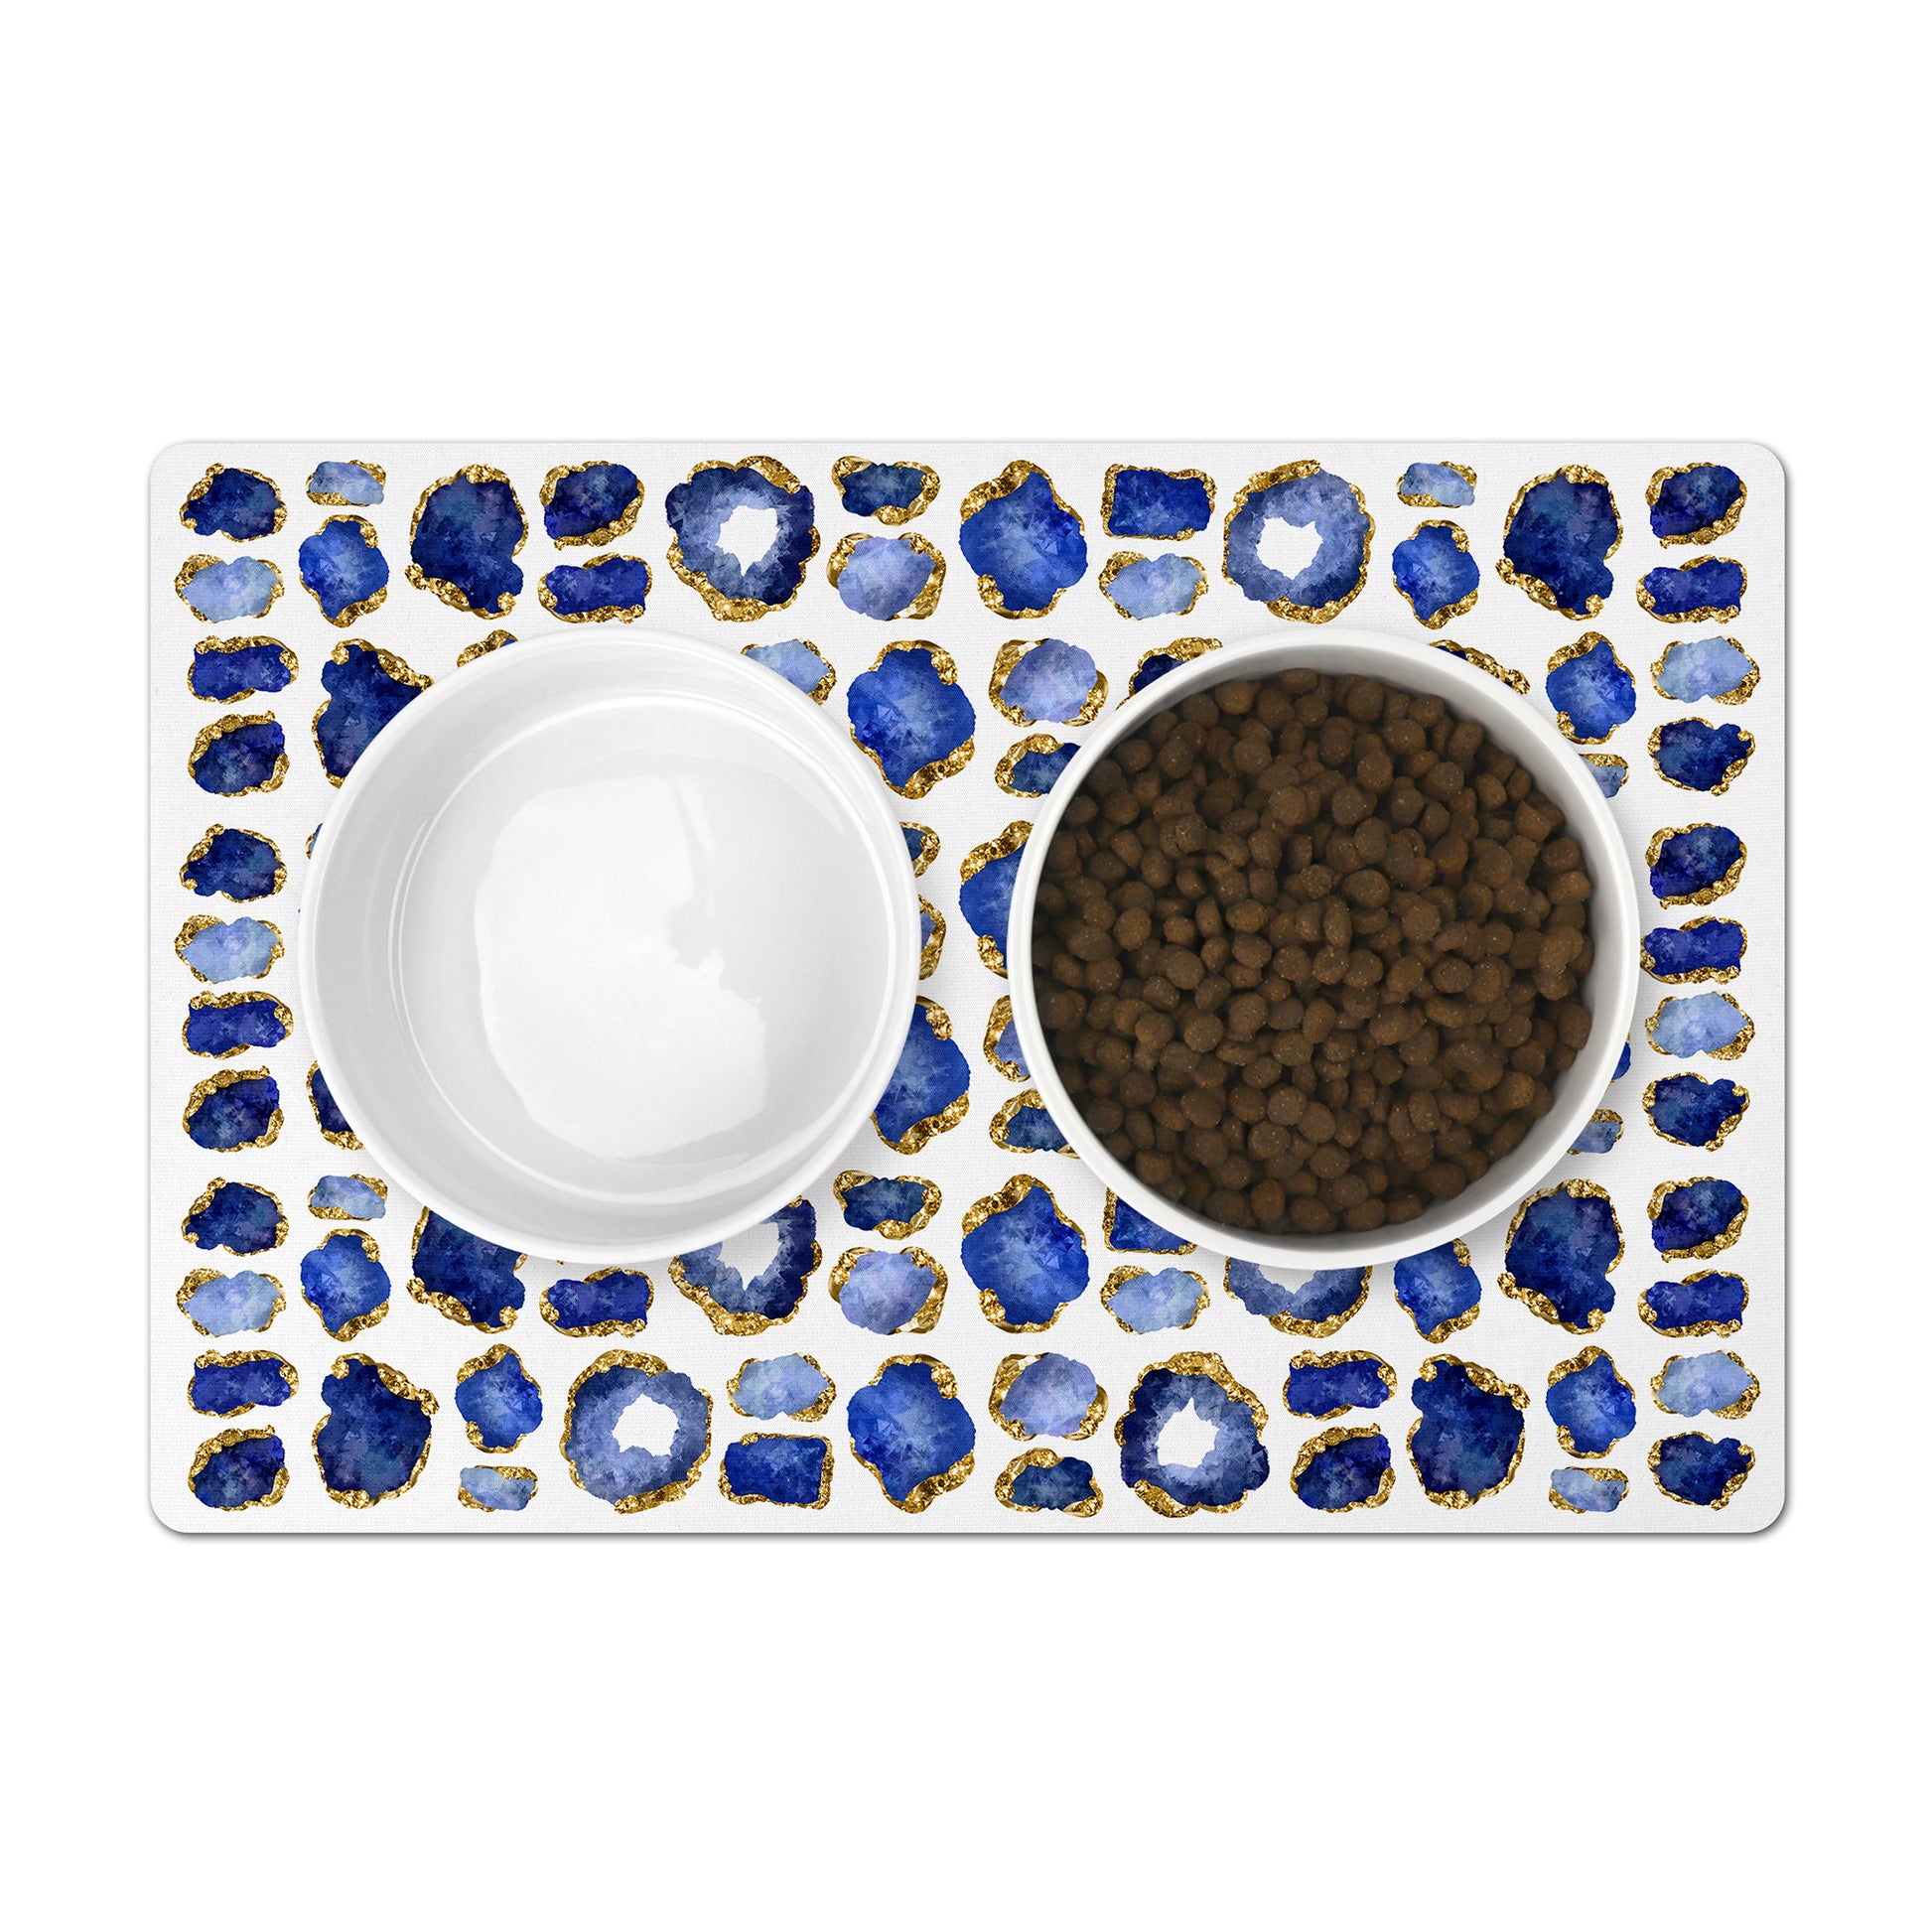 Jewel art print pet placemat has gorgeous blue sapphire and gold. Pet feeding mat is machine washable and has a nonskid rubber back.